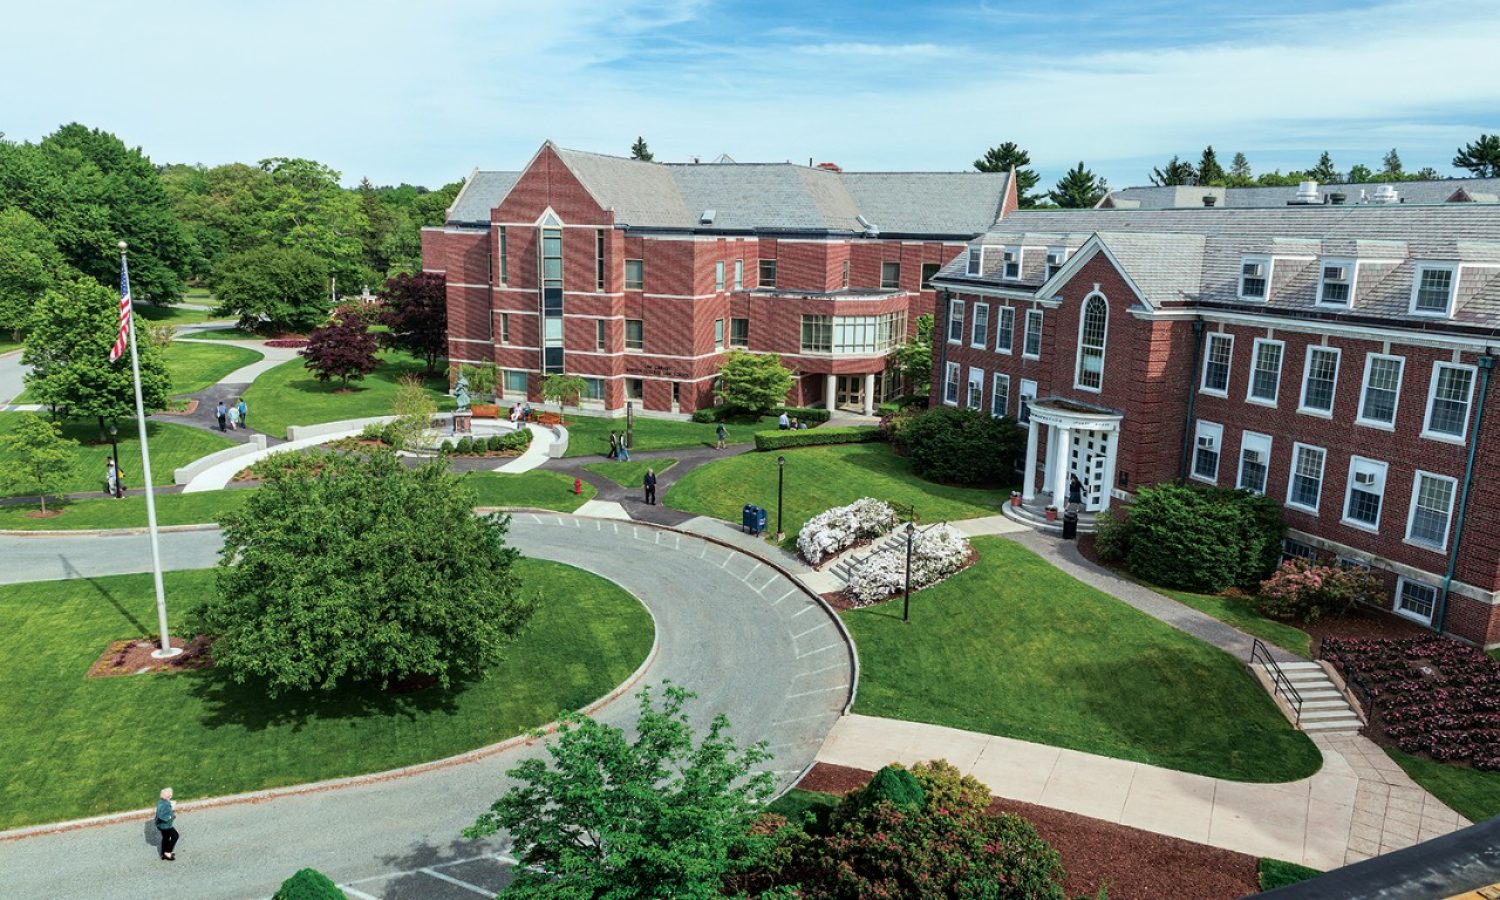 A view of the law school campus from above